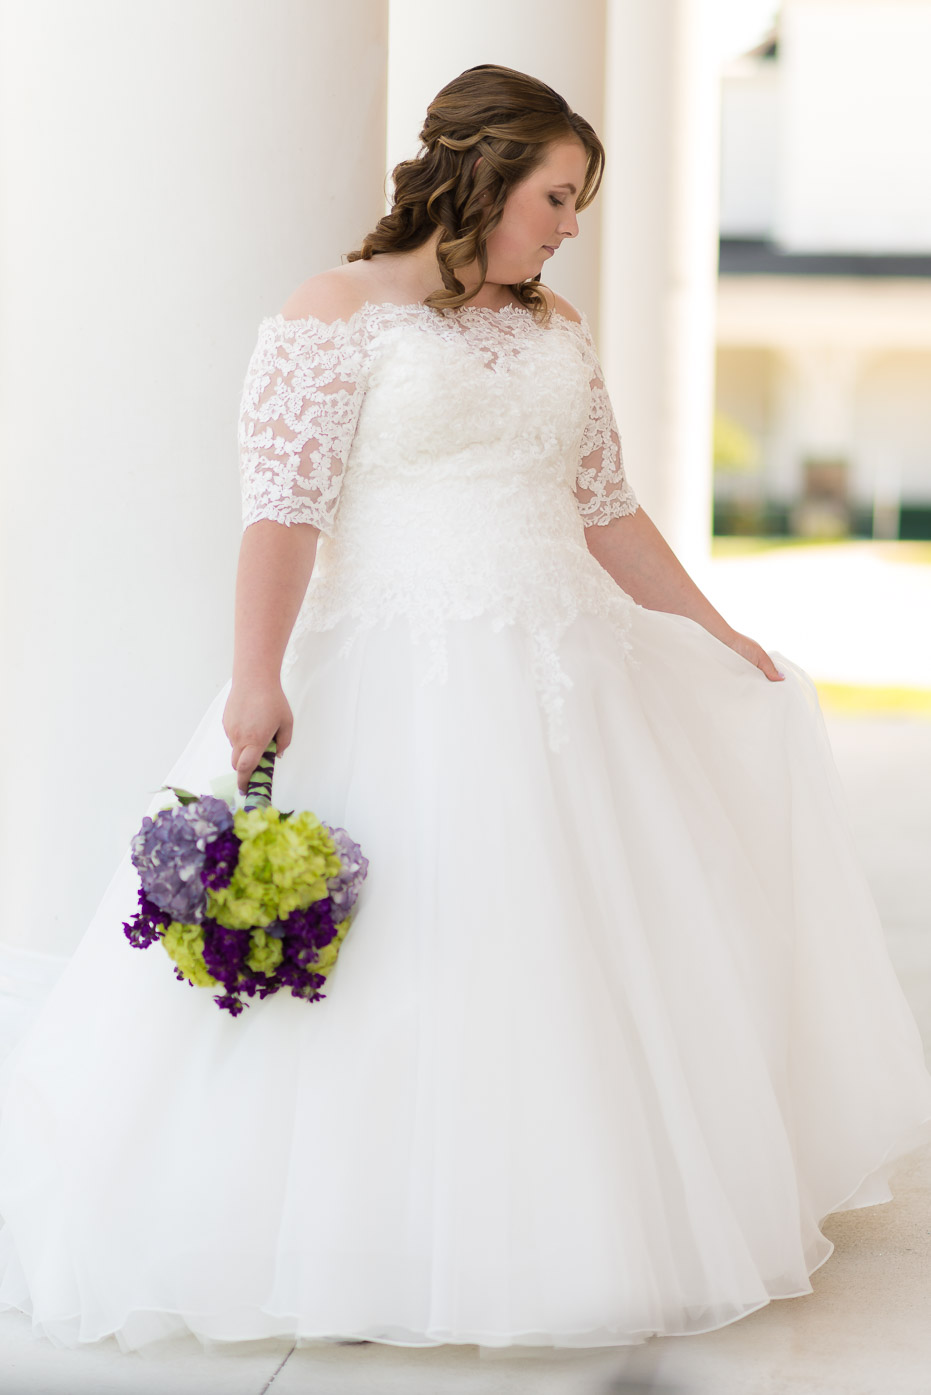 Wedding Gown with Green and Purple Bouquet